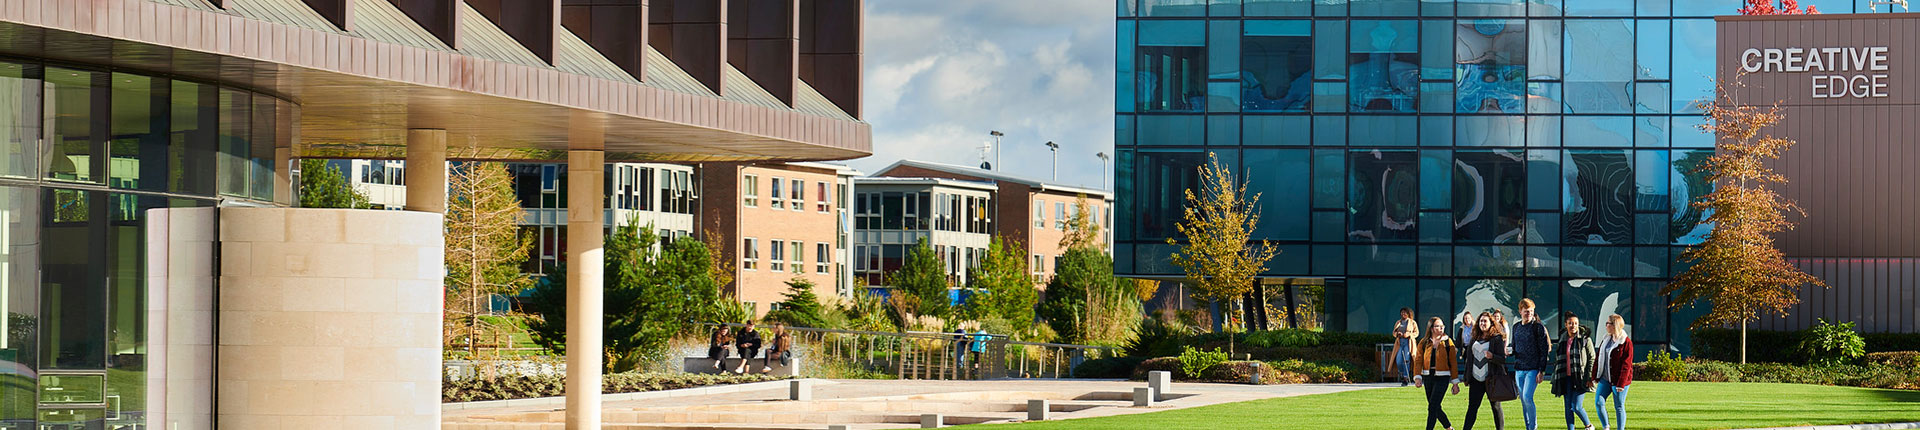 Exterior of Creative Edge and Catalyst buildings. There are students walking across the path towards the Catalyst building.